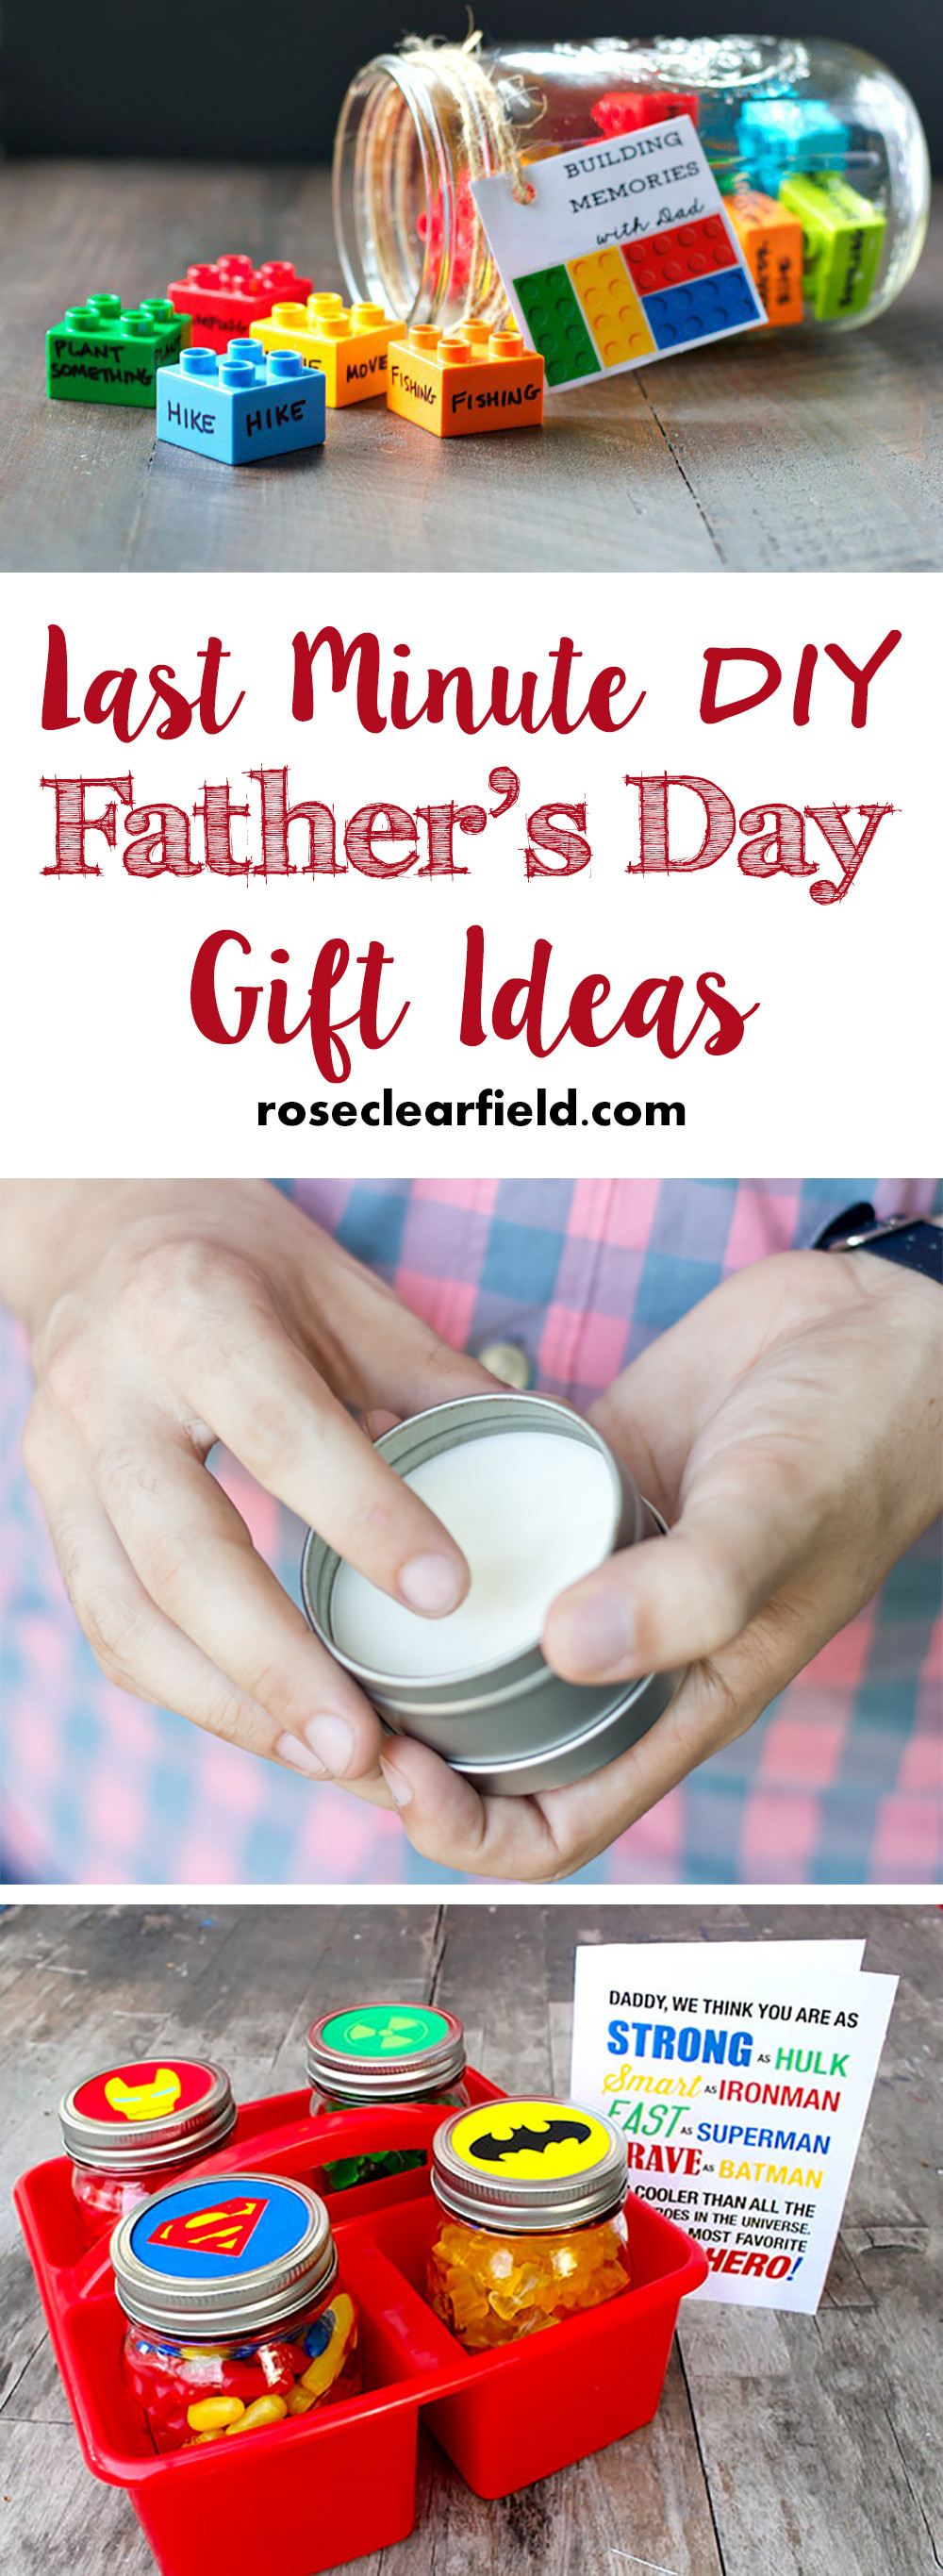 DIY Dad Gifts
 Last Minute DIY Father s Day Gift Ideas • Rose Clearfield